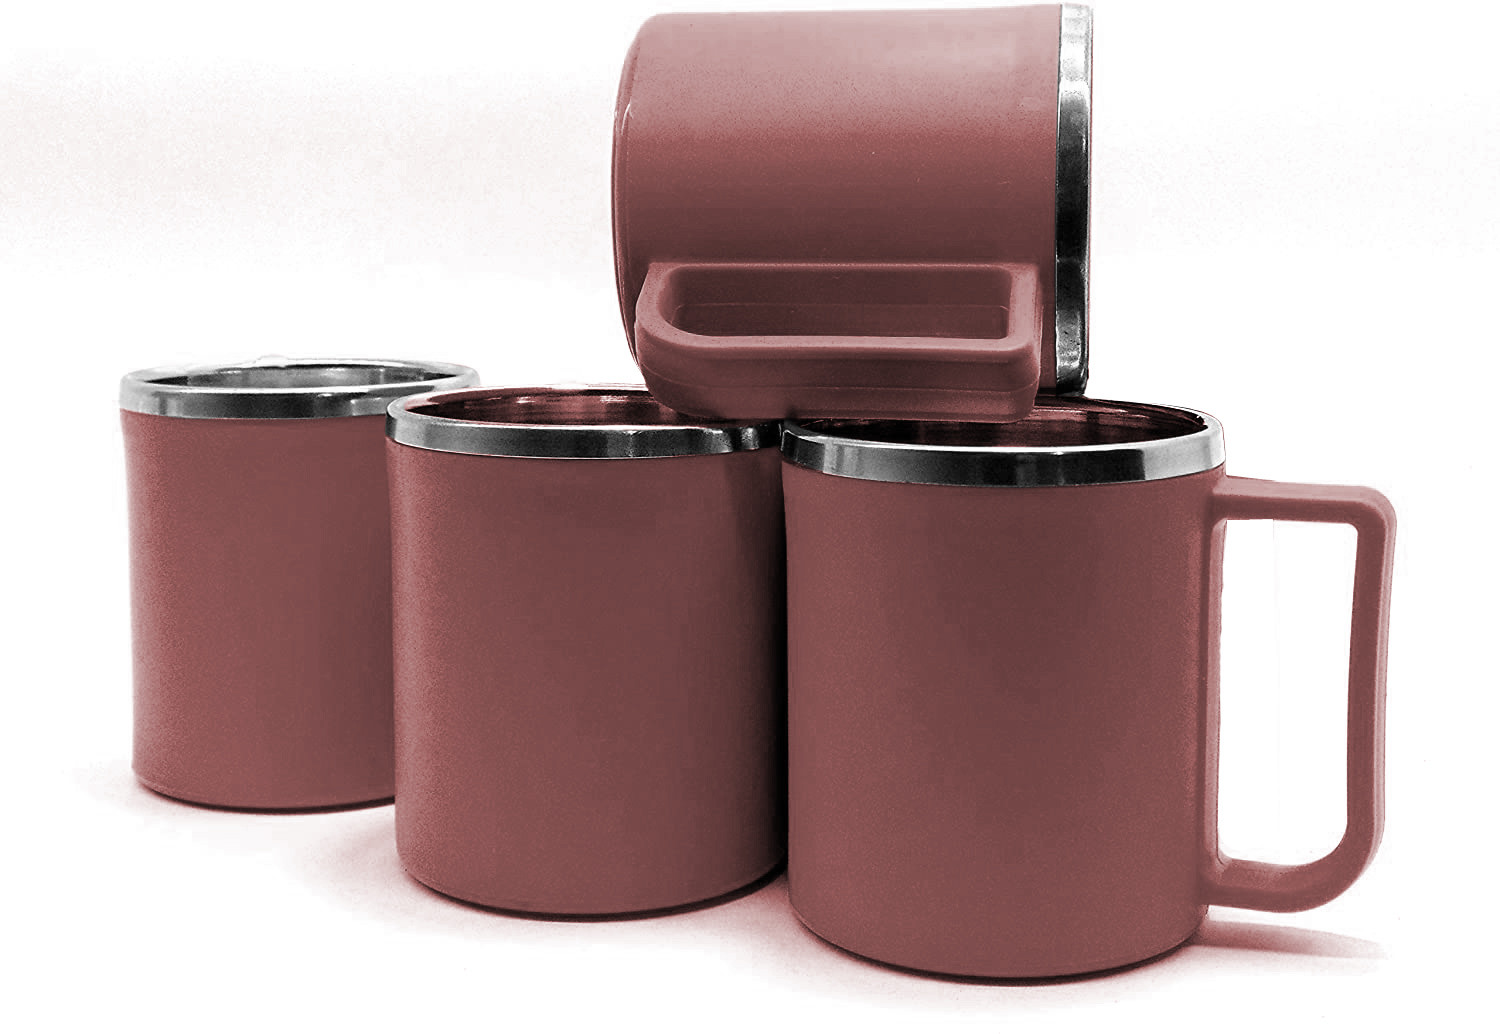 Kuber Industries Plastic Steel Cups for Coffee Tea Cocoa, Camping Mugs with Handle, Portable & Easy Clean (Brown)